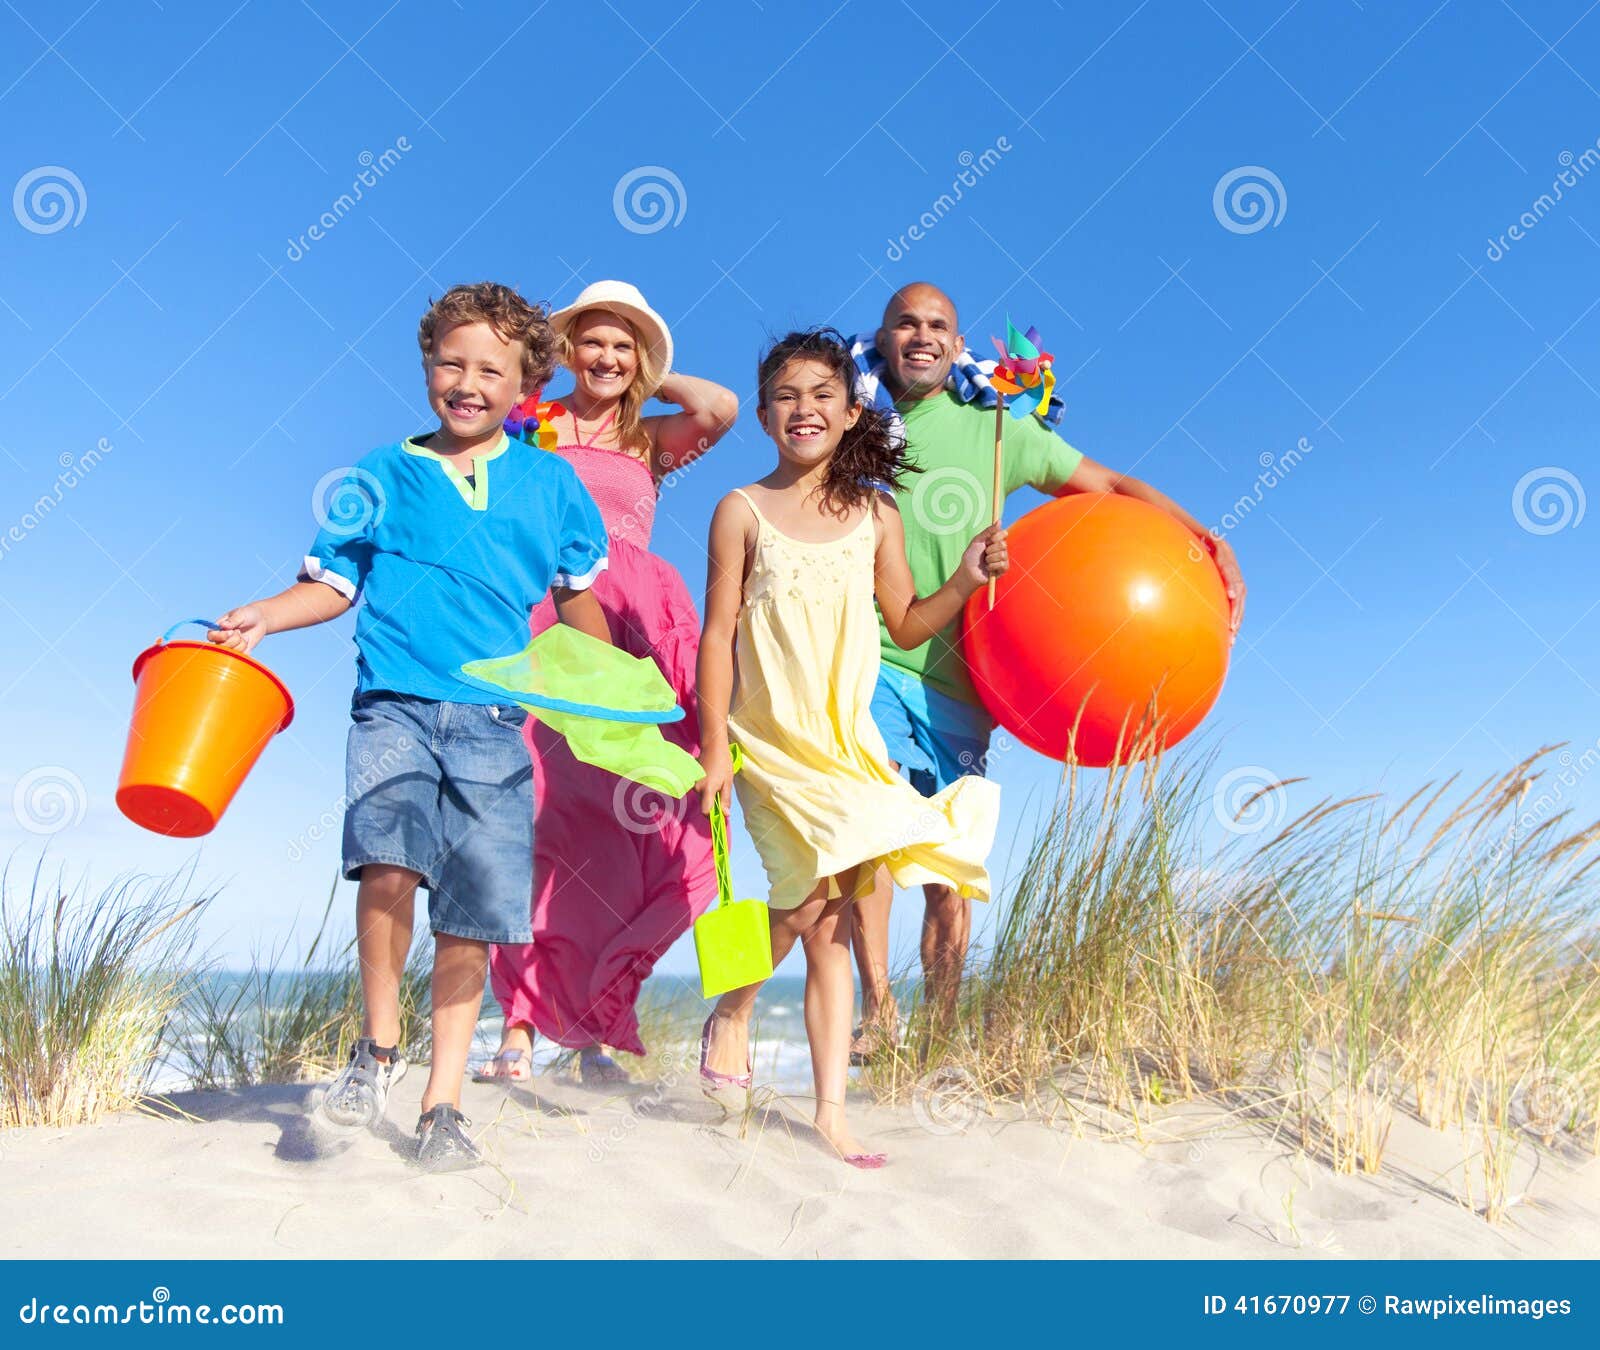 Cheerful Family Bonding by the Beach Stock Image - Image of people